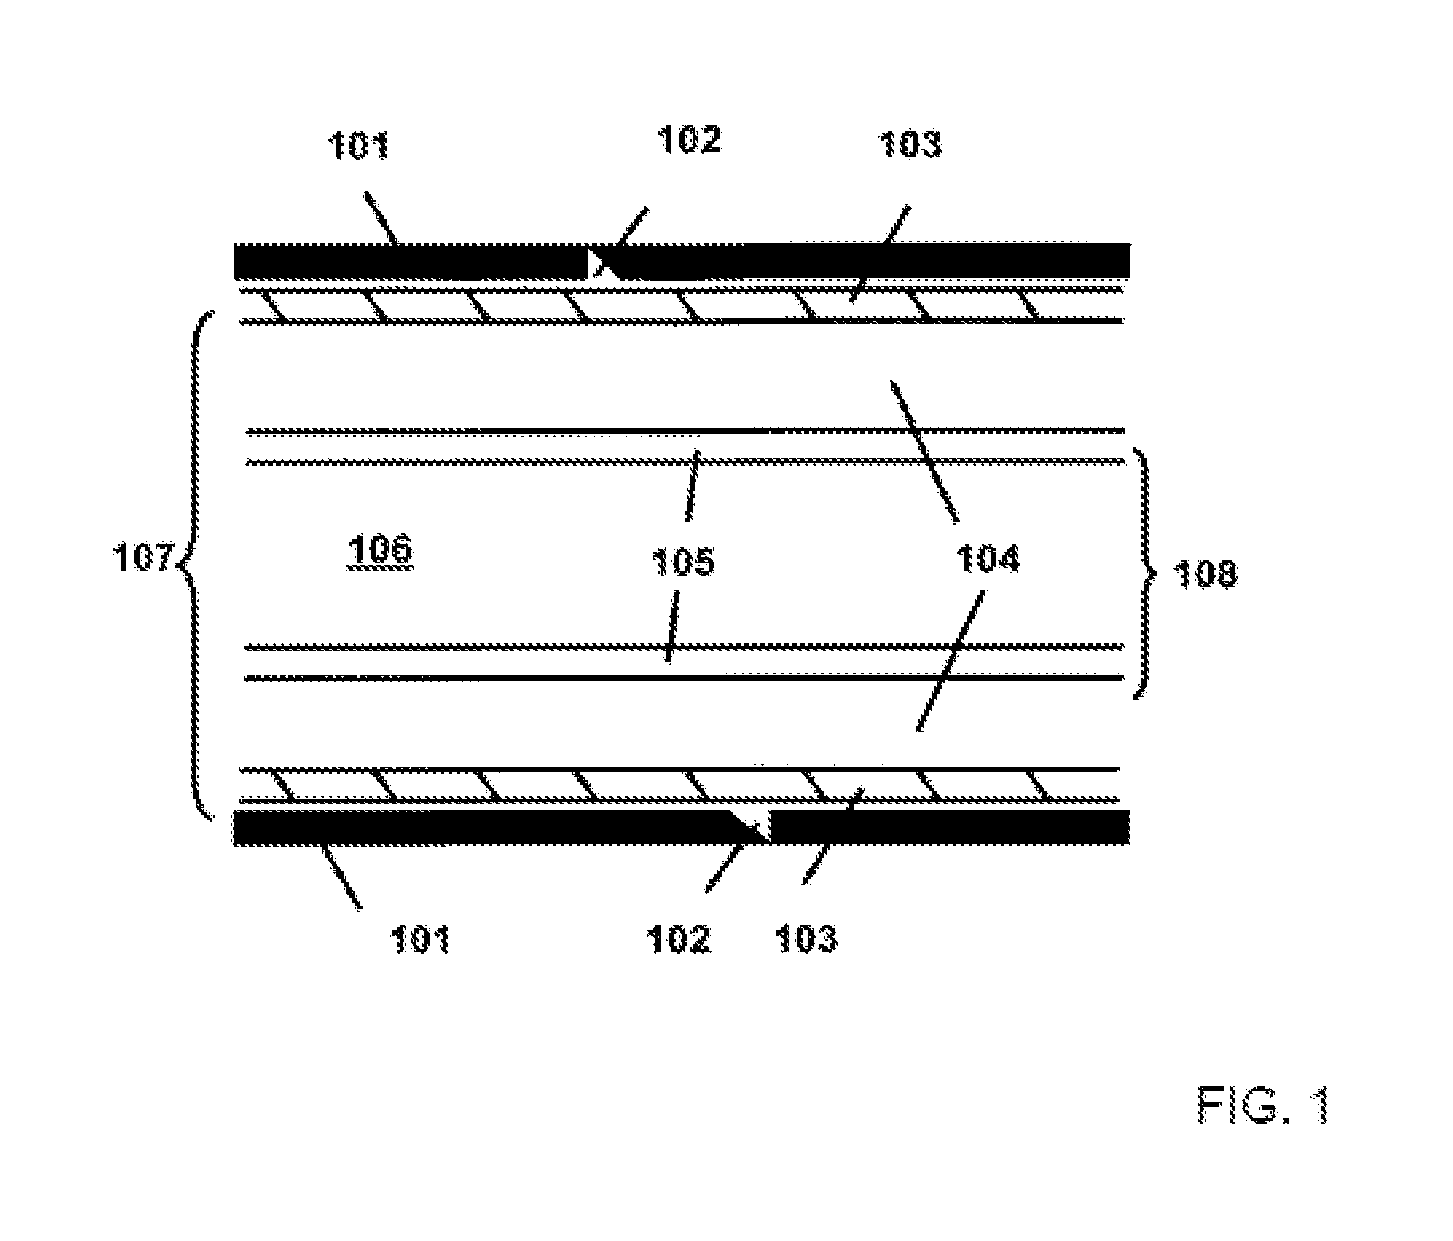 Multi-layer film permeable to UV radiation